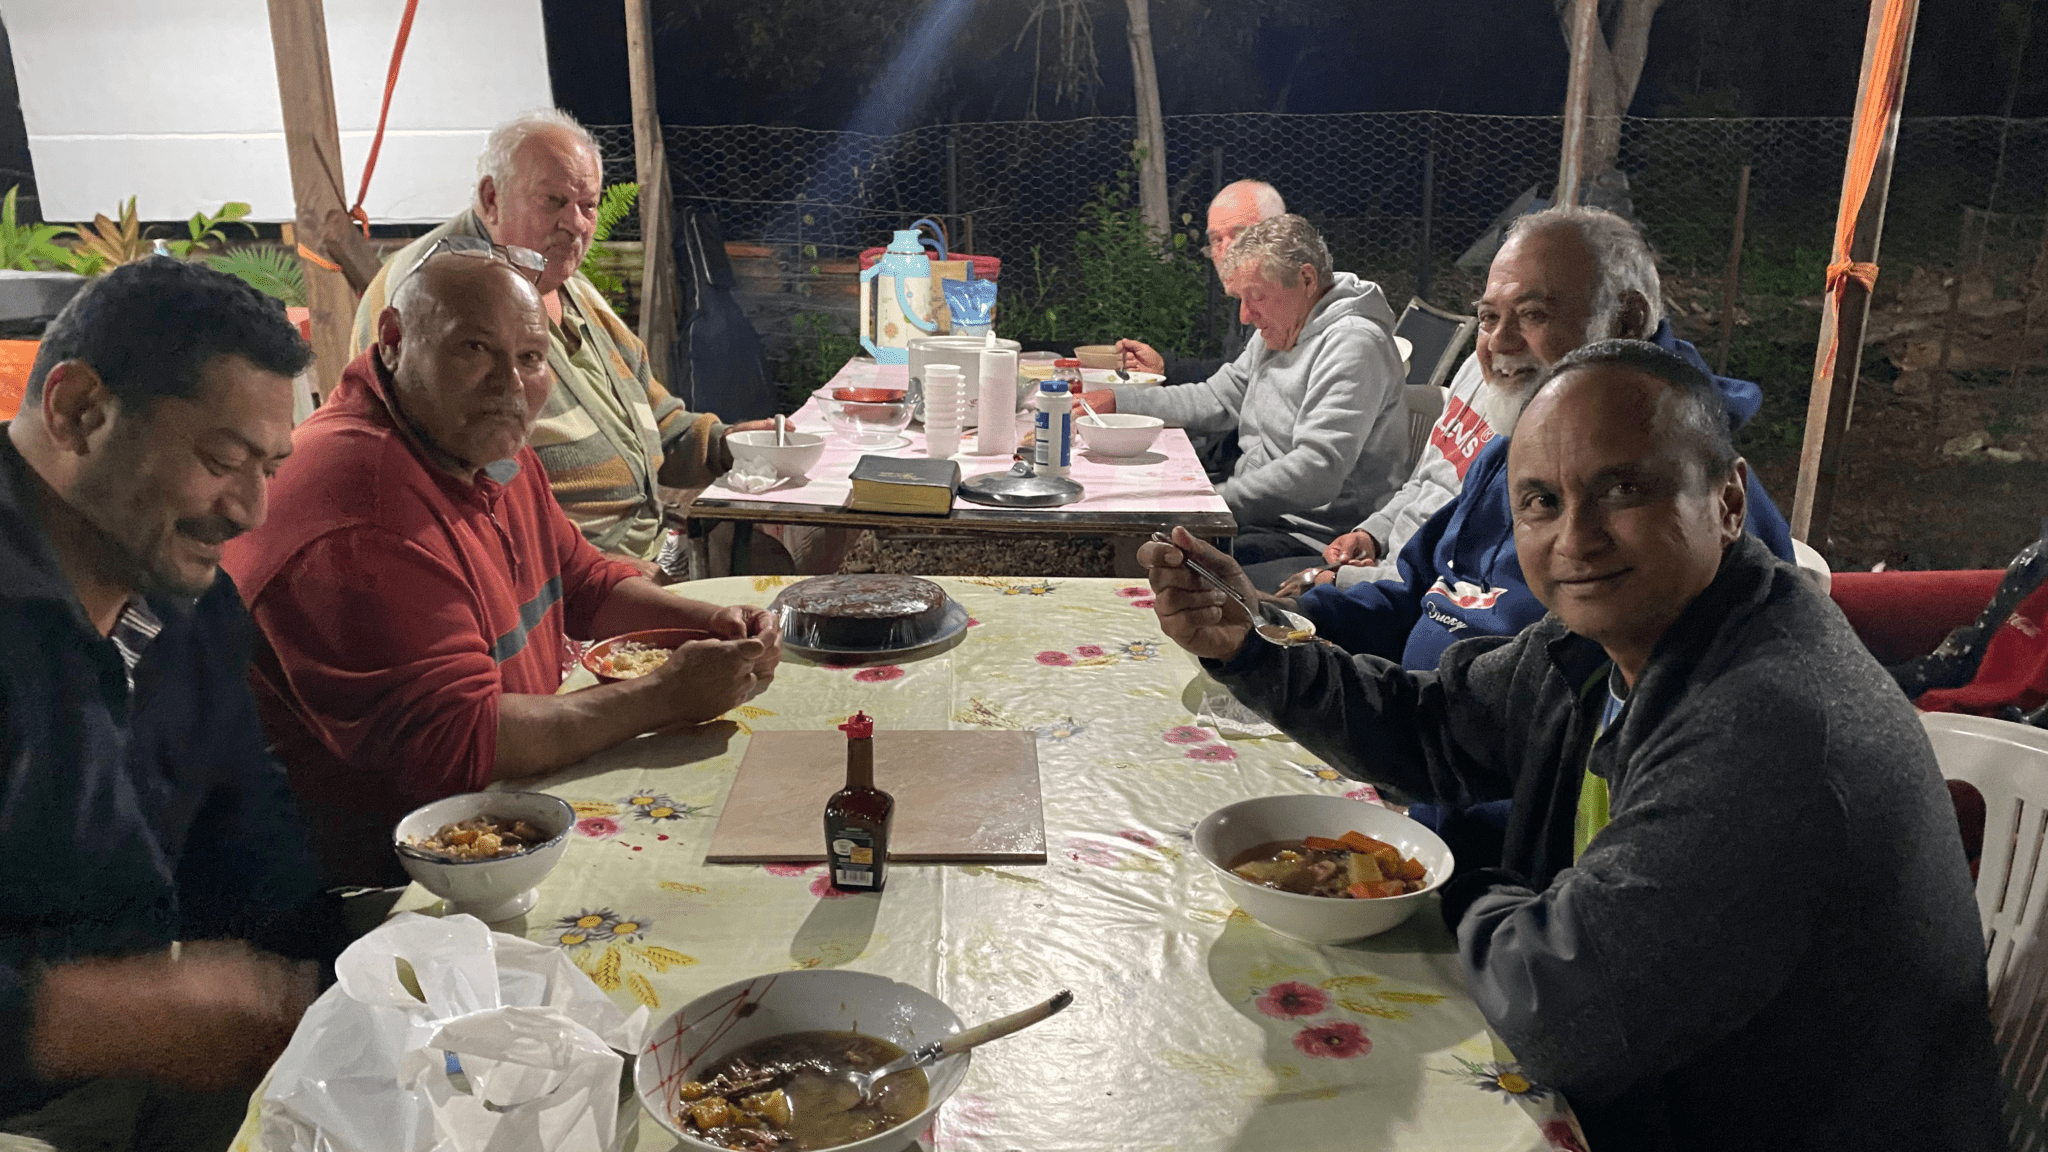 Some of the small-group members enjoying a meal together in Tomo village, New Caledonia. [Photo: Adventist Record]